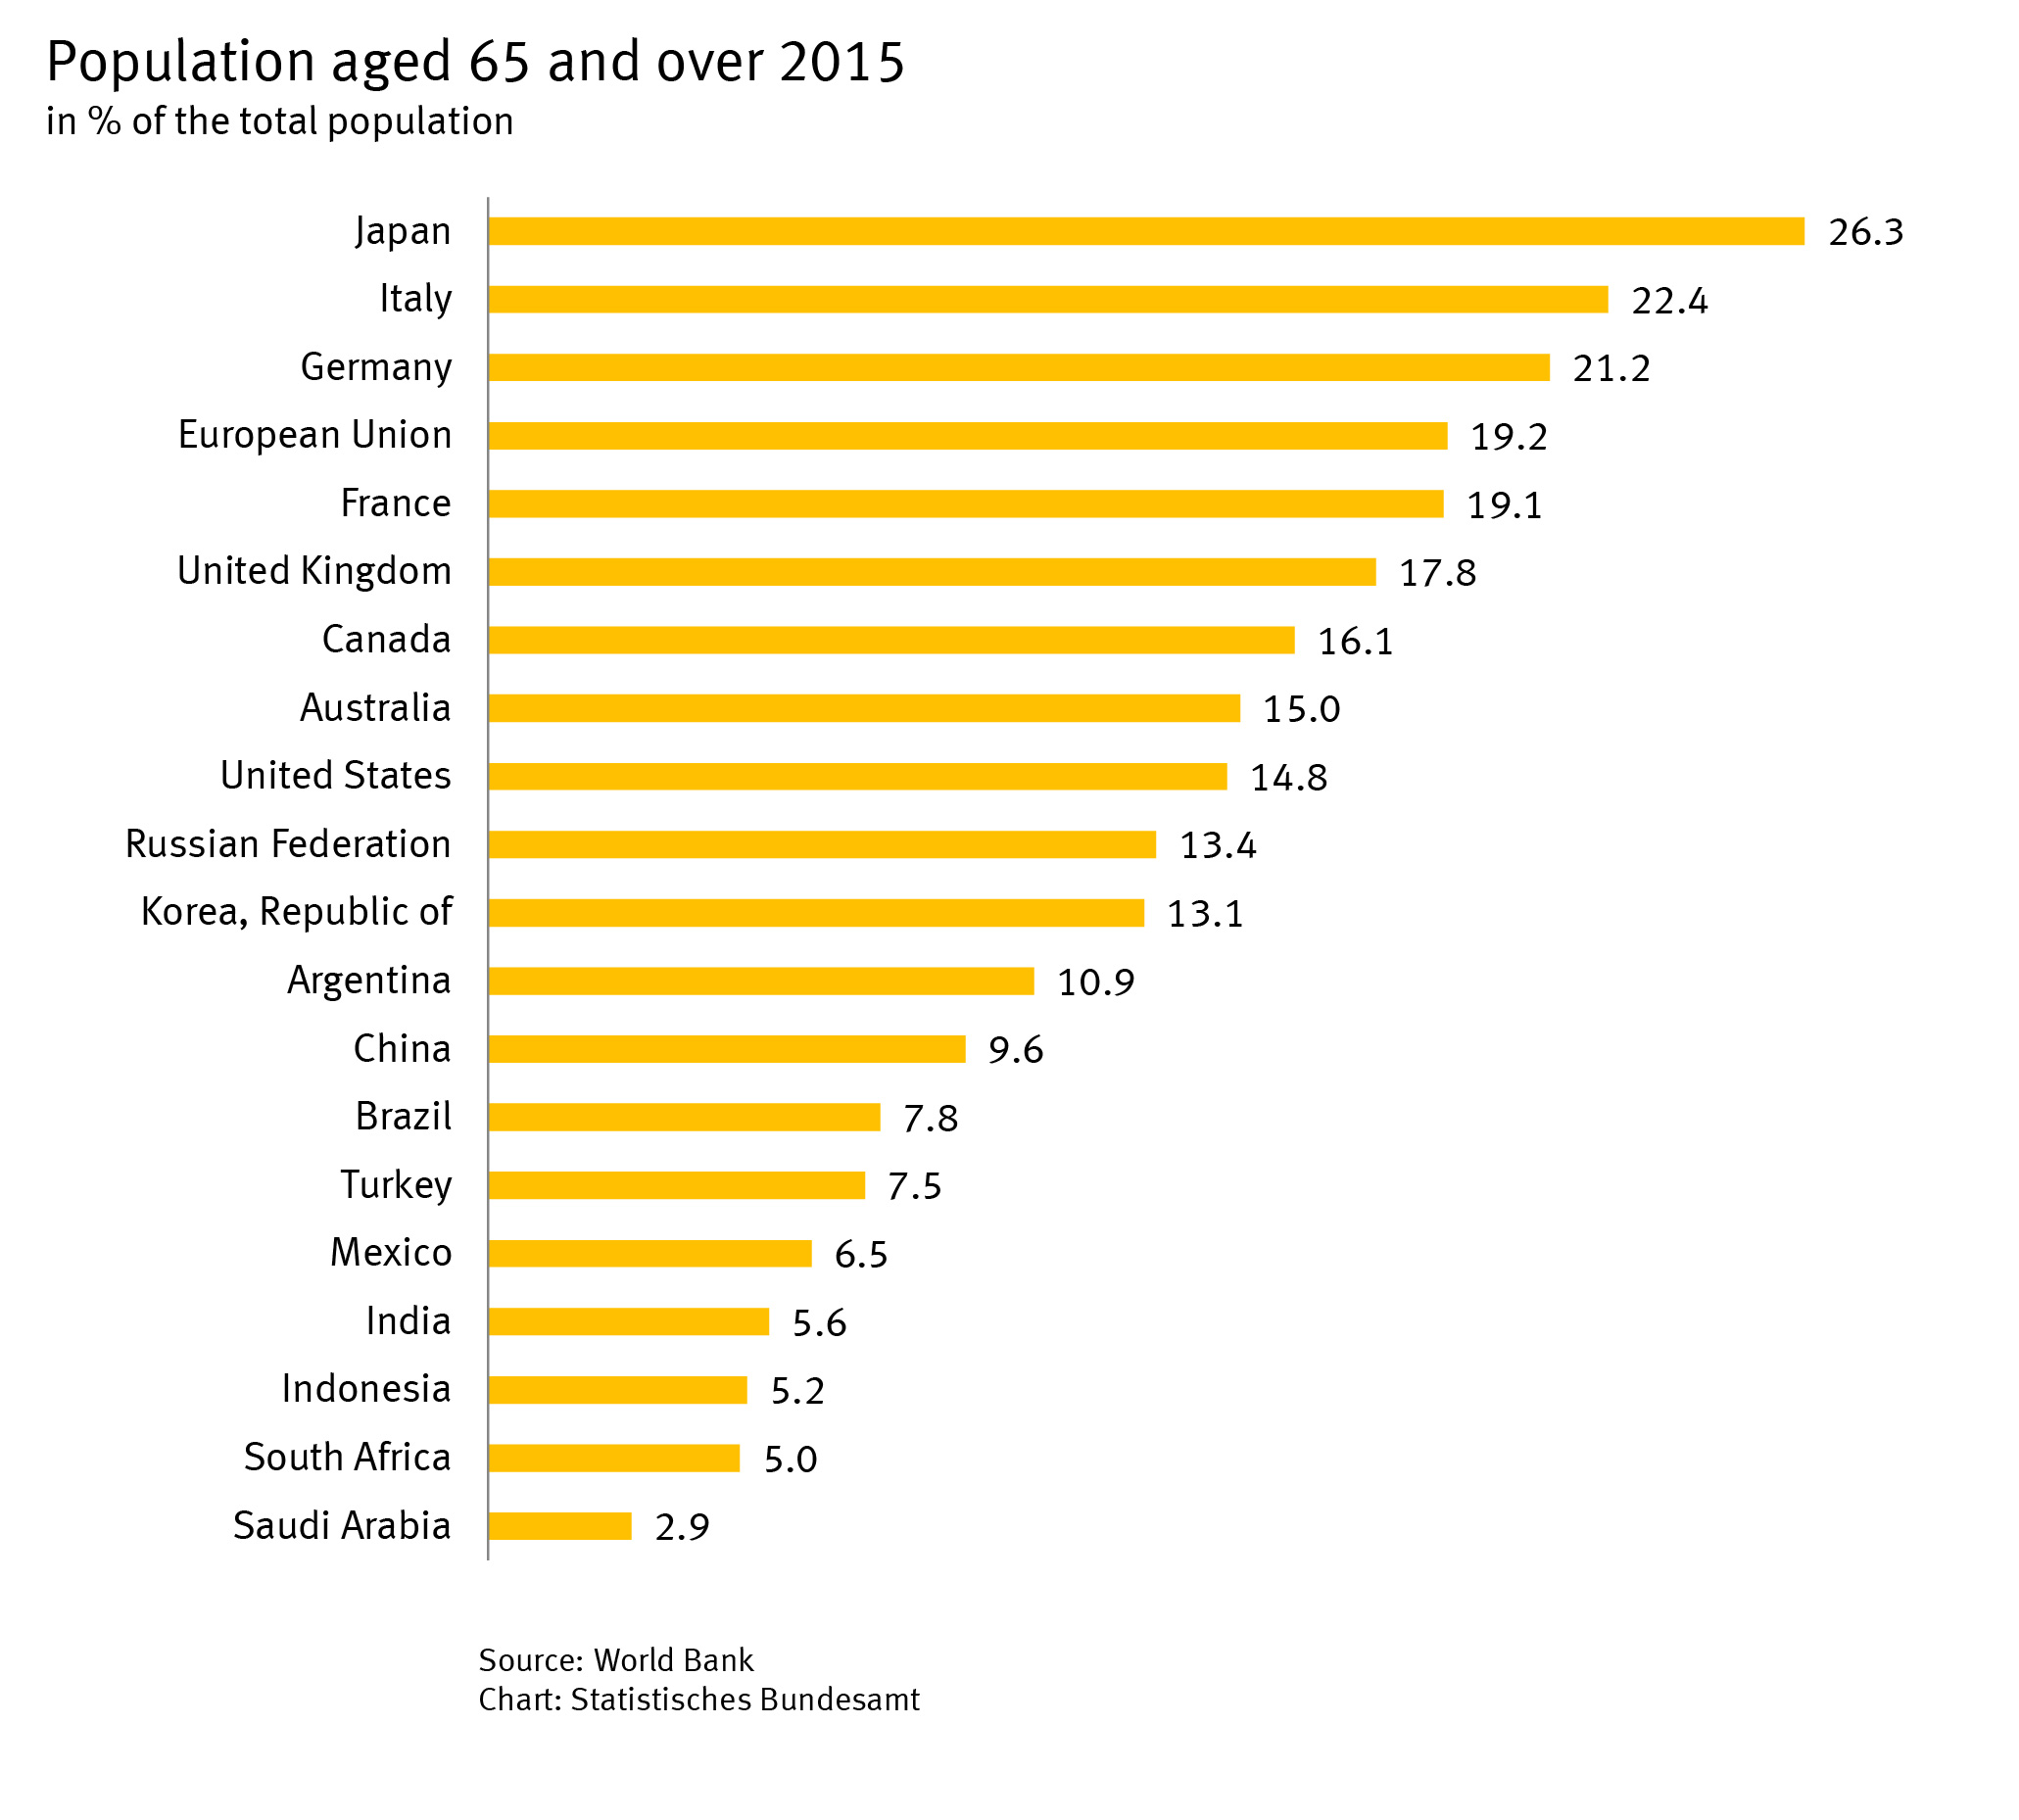 Population aged 65 and over